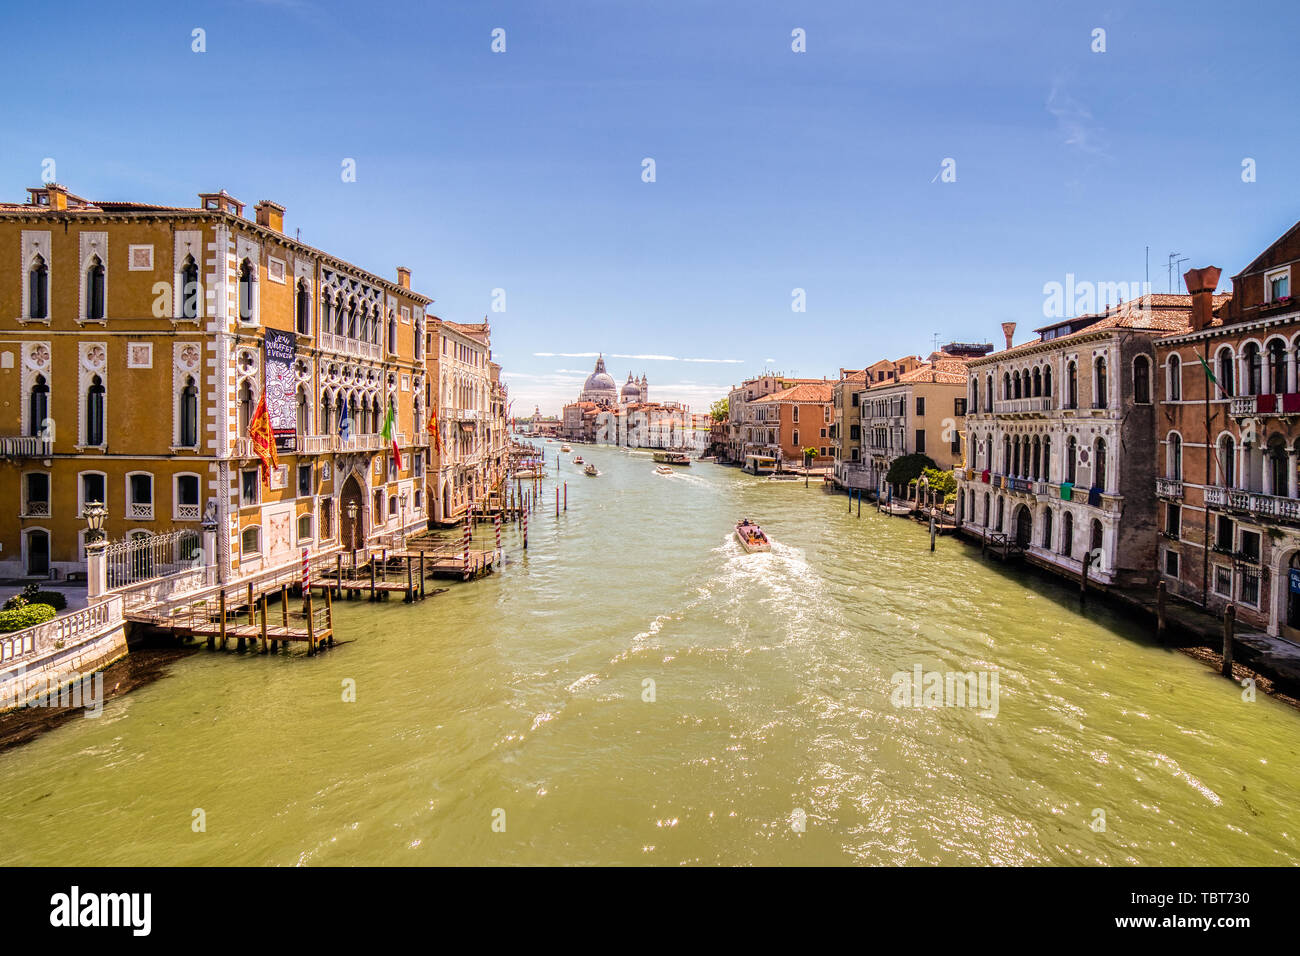 VENEZIA, ITALY – MAY 31, 2019: tourists visiting the city and enjoying the view of boats passing in Canal Grande main channel of Venice,  from bridge  Stock Photo